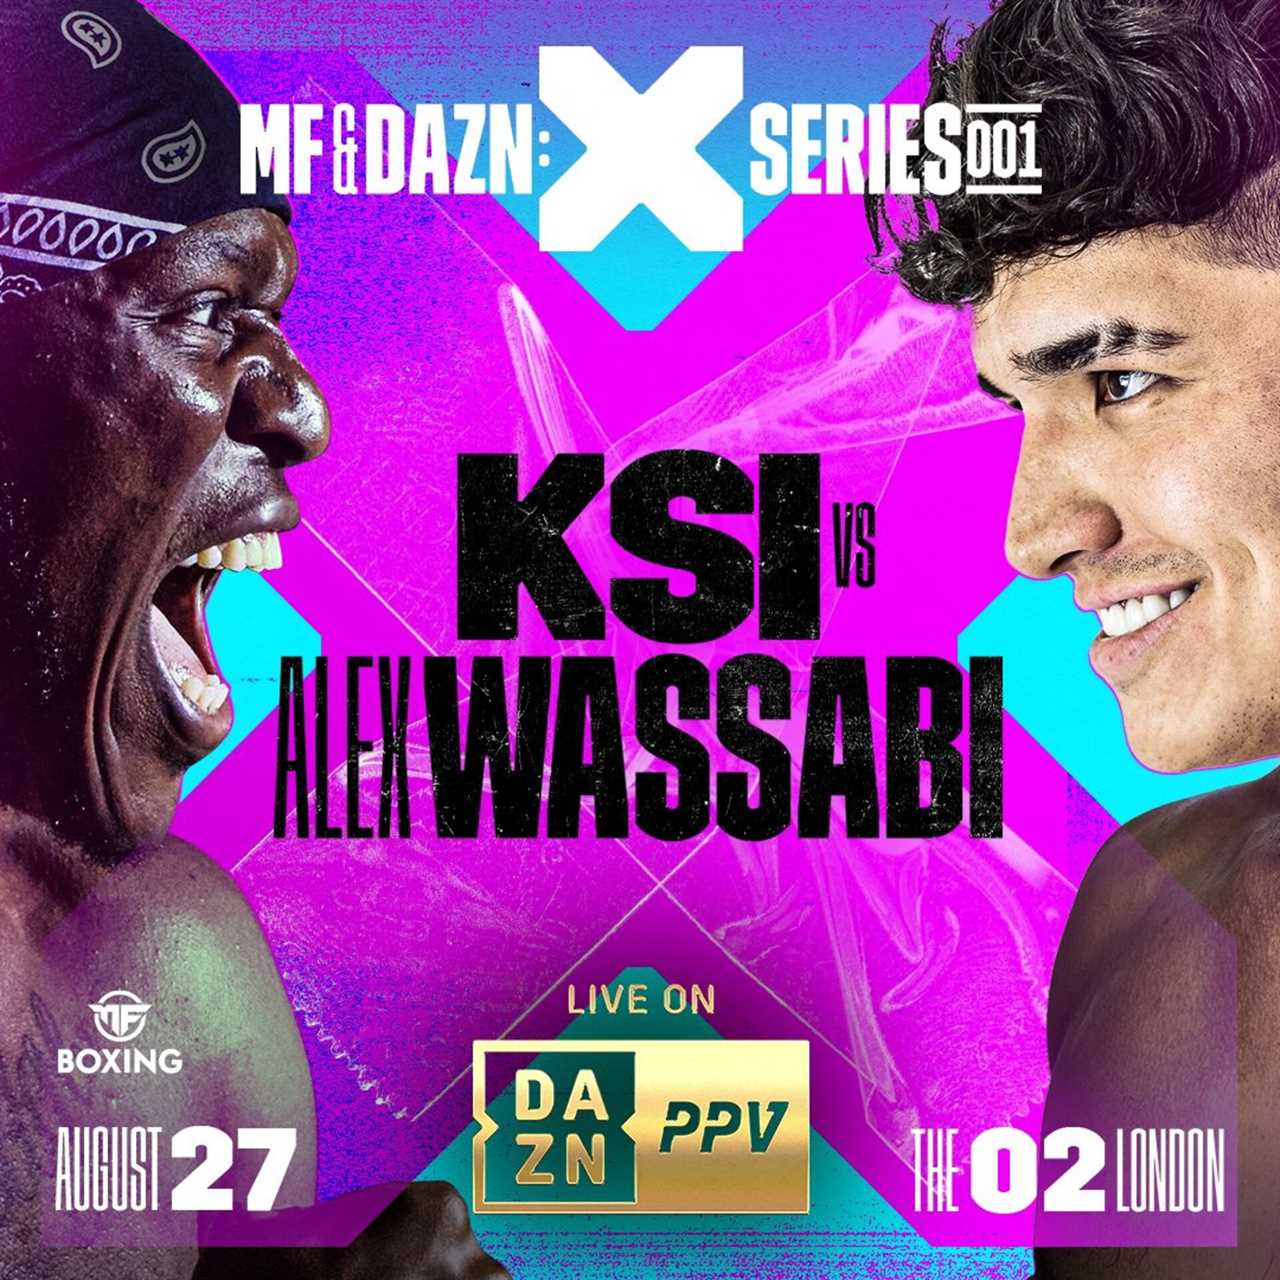 KSI announced that he will be fighting Alex Wassabi next. He is aiming for revenge after his brother Deji beat him.